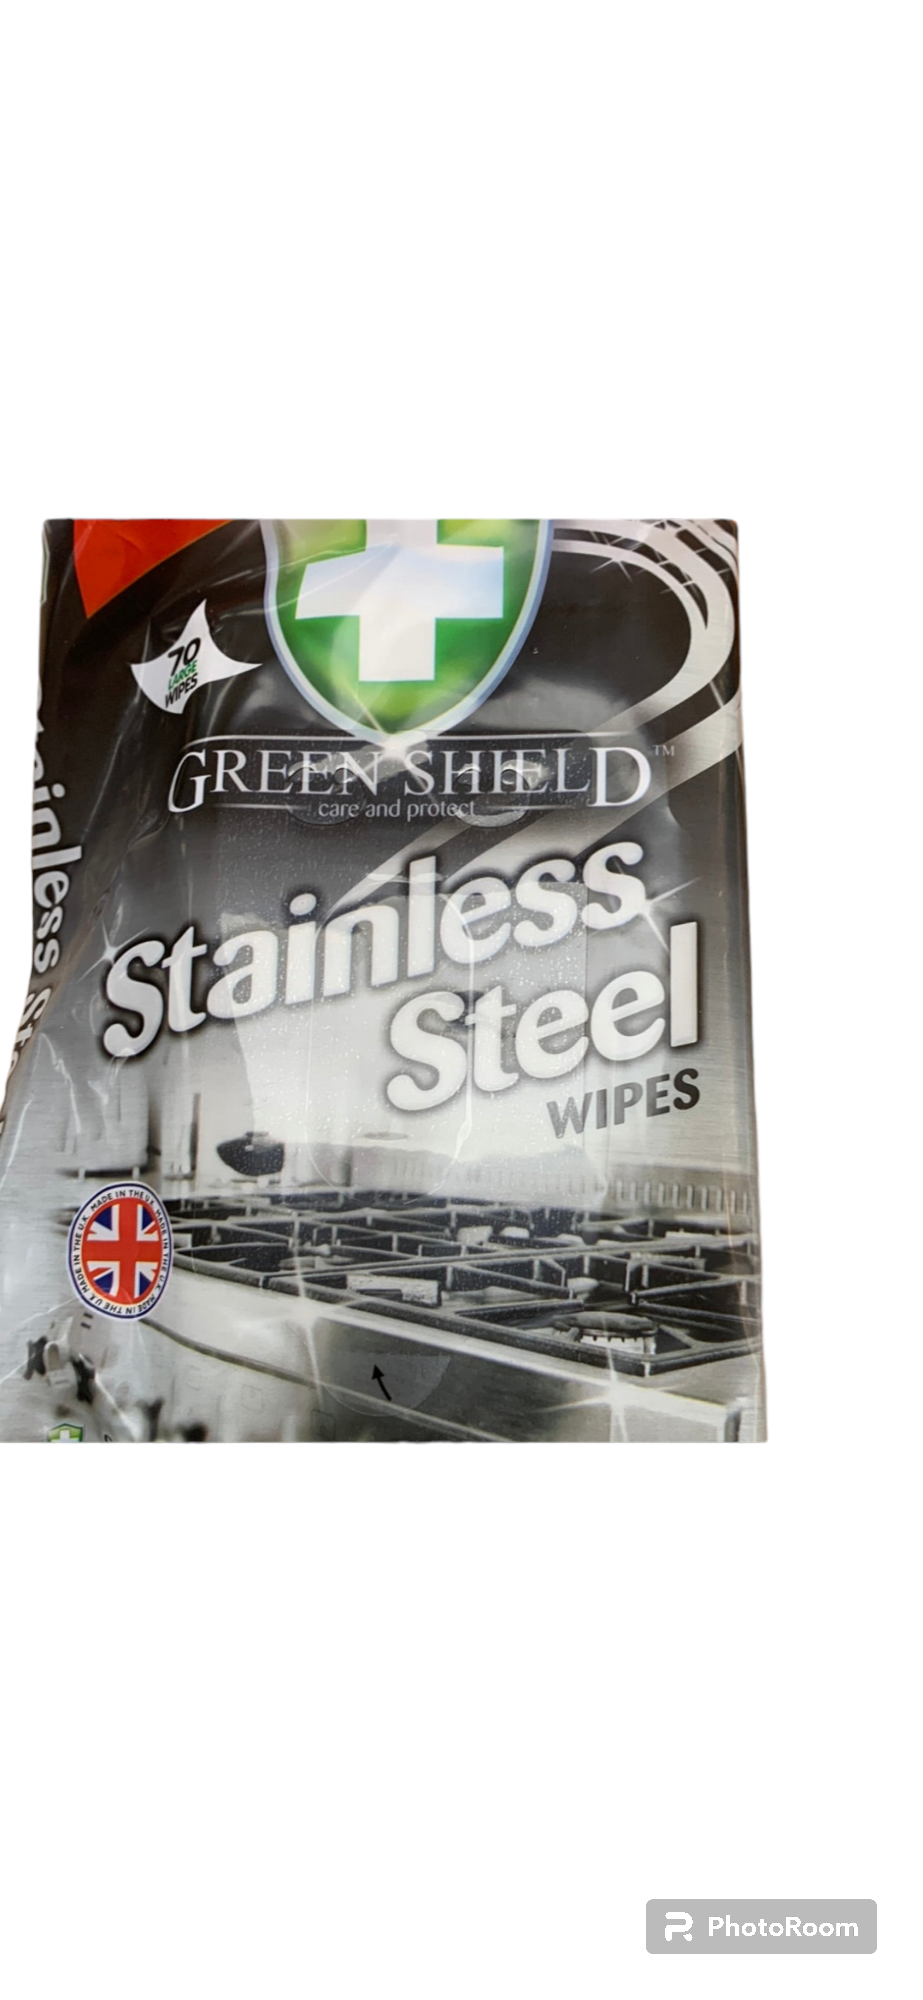 Green shield stainless steel wipes 70 wipes.